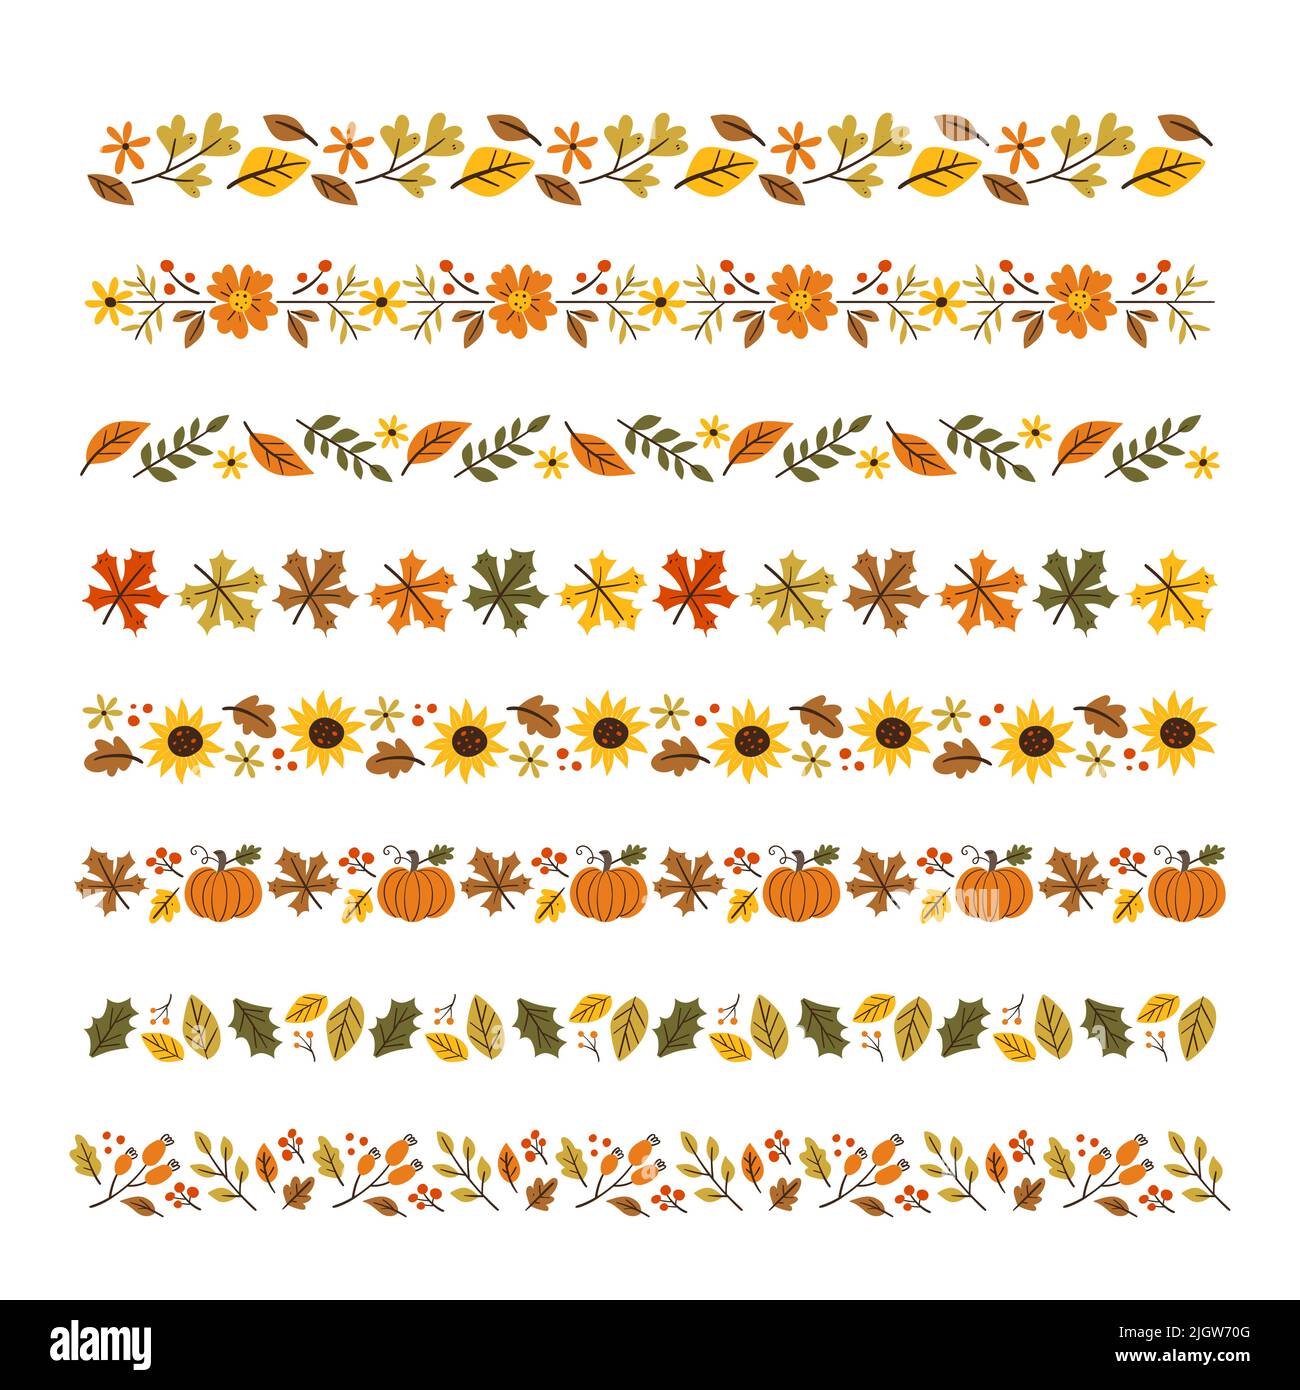 Autumn floral decorative border collection. Seamless borders with fall leaves, seasonal flowers and pumpkins. Isolated elements. Vector illustration. Stock Vector